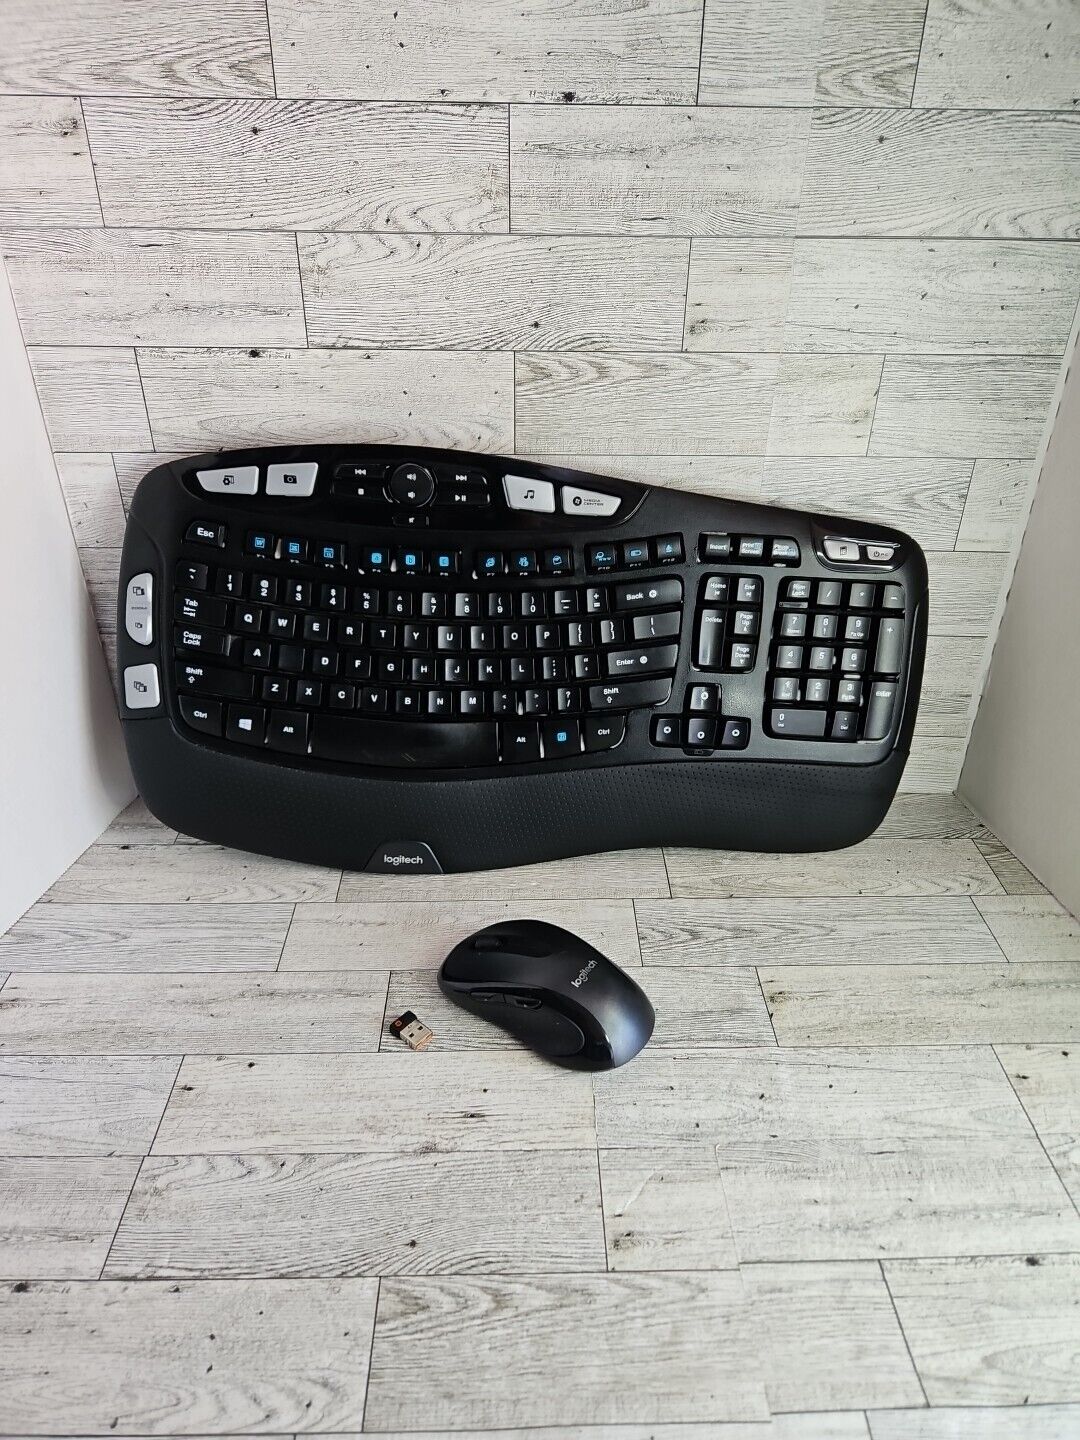 Logitech K350 Wireless Keyboard, Mouse, + USB Receiver mouse  Tested 